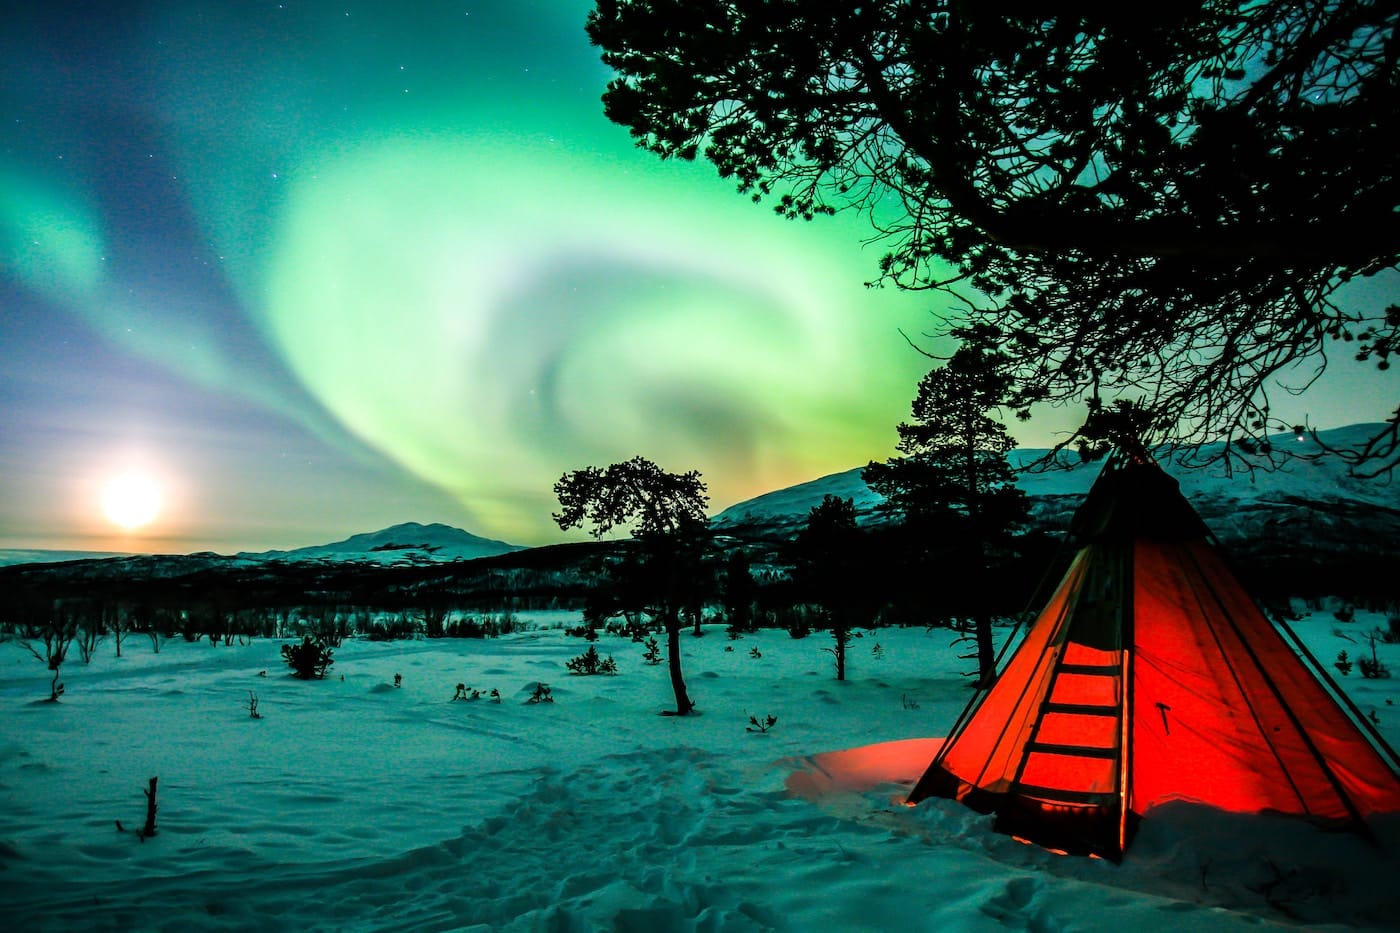 orange tent on snow covered ground during night time-Northern Lights